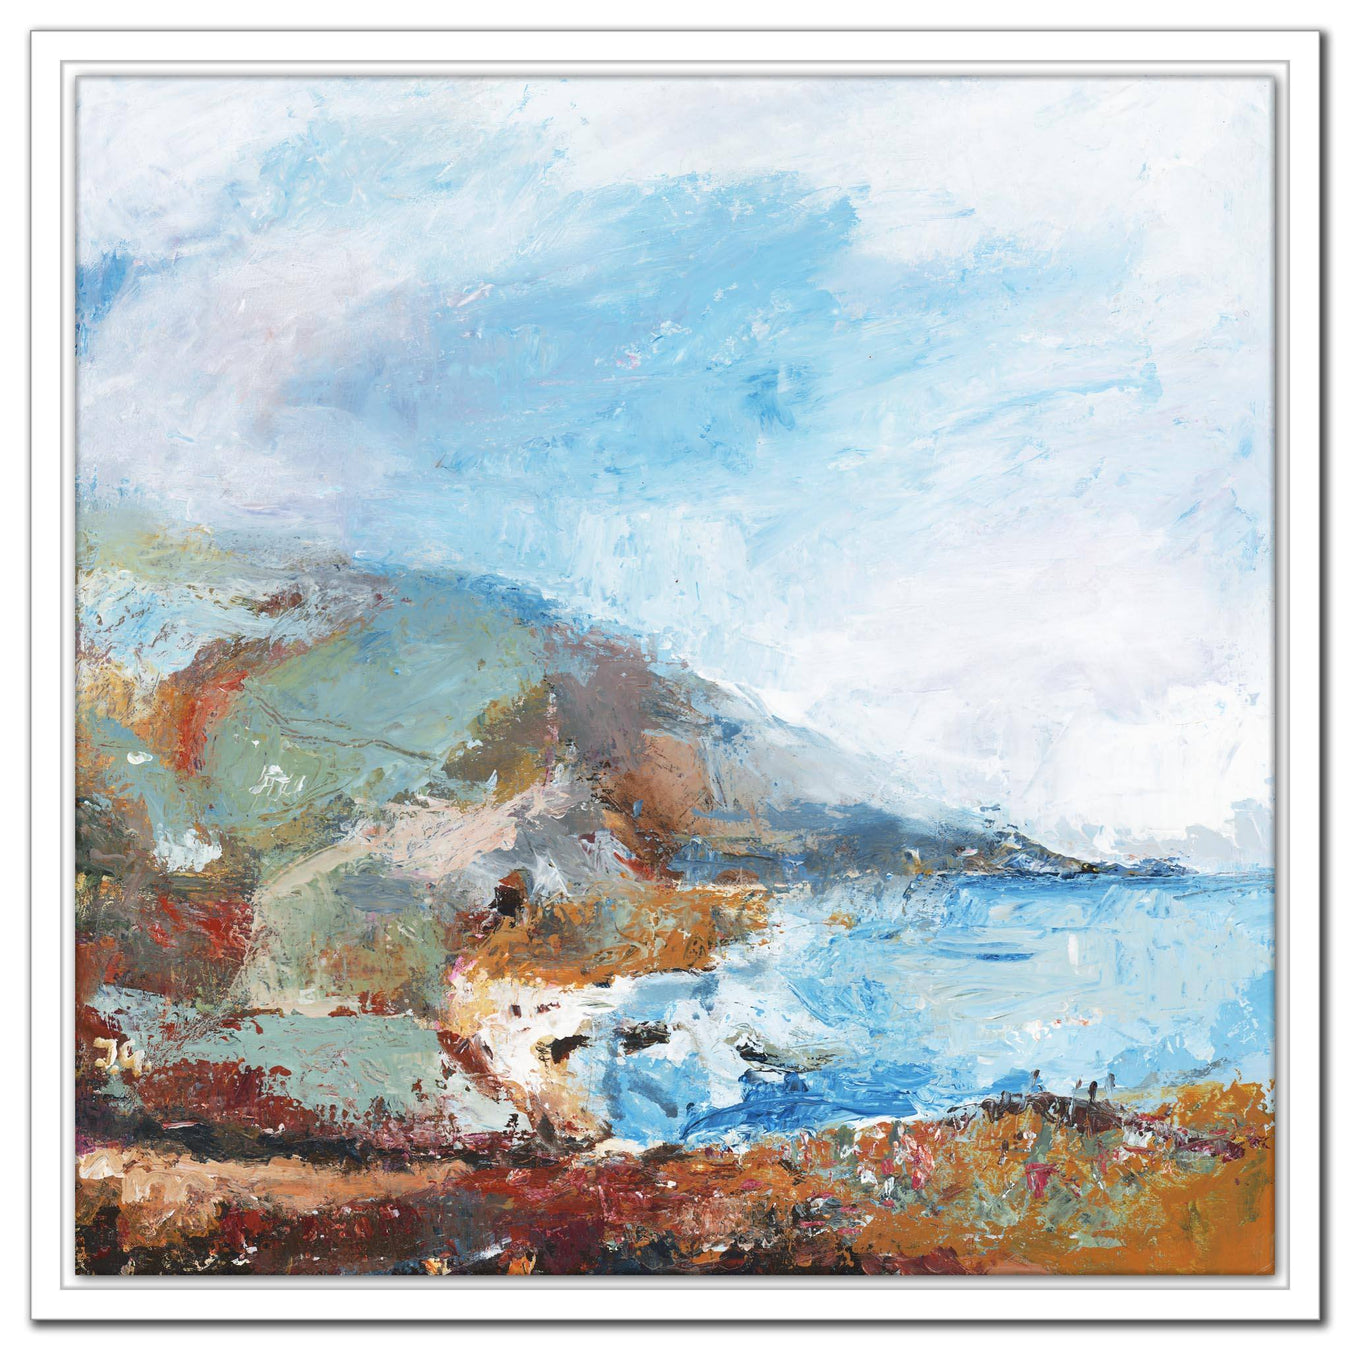 Collection of coastal canvas prints. Explore a wonderful and diverse collection of Coastal Canvas Prints with images from the coast from dramatic, rugged cliffs to studies of shells as the sea laps the shore. Made from original art.